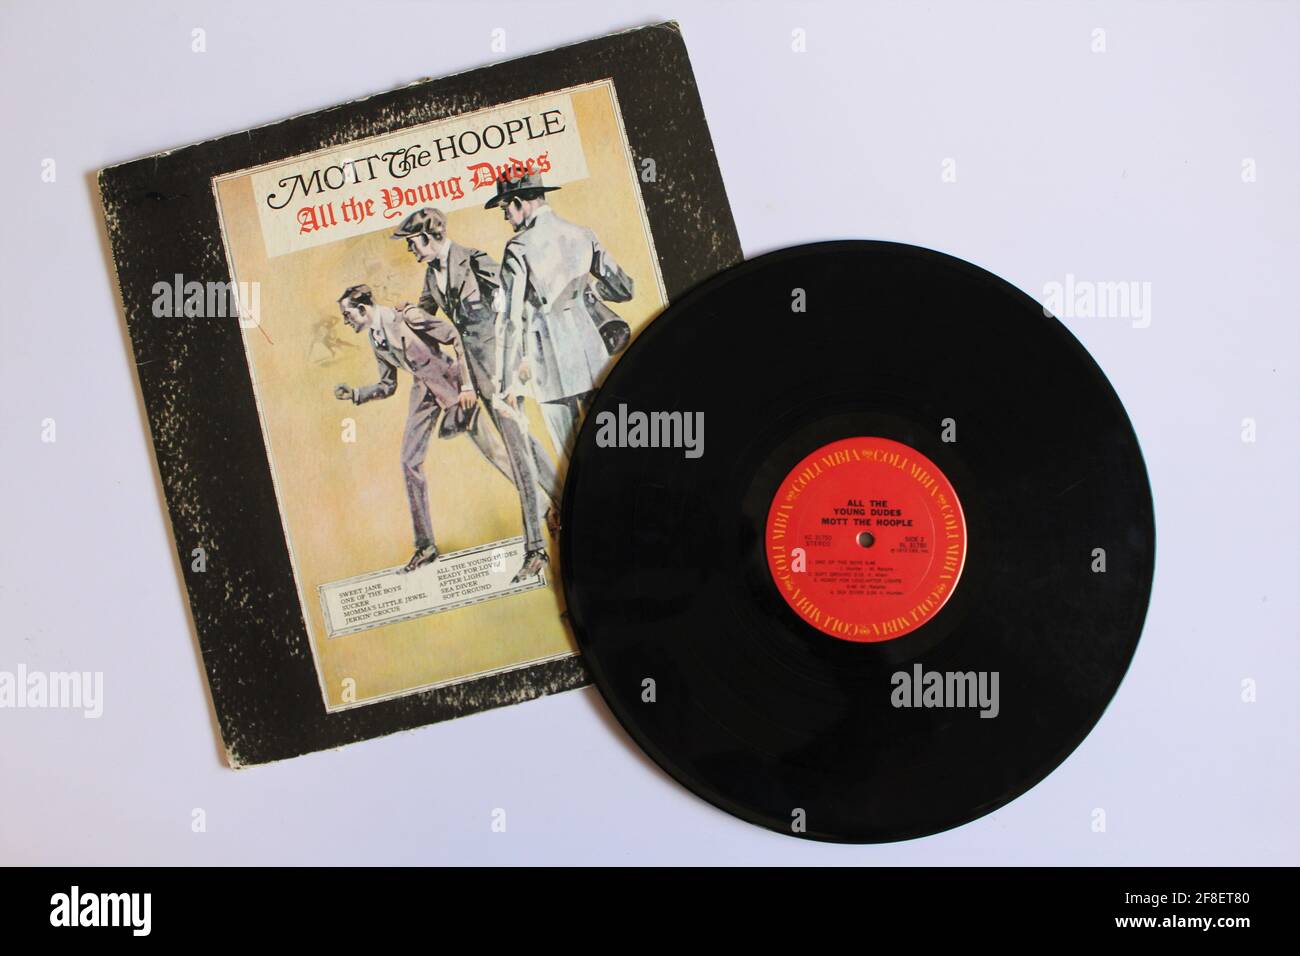 English Glam rock band, Mott the Hoople music album on vinyl record LP disc. Titled: All the Young Dudes Stock Photo